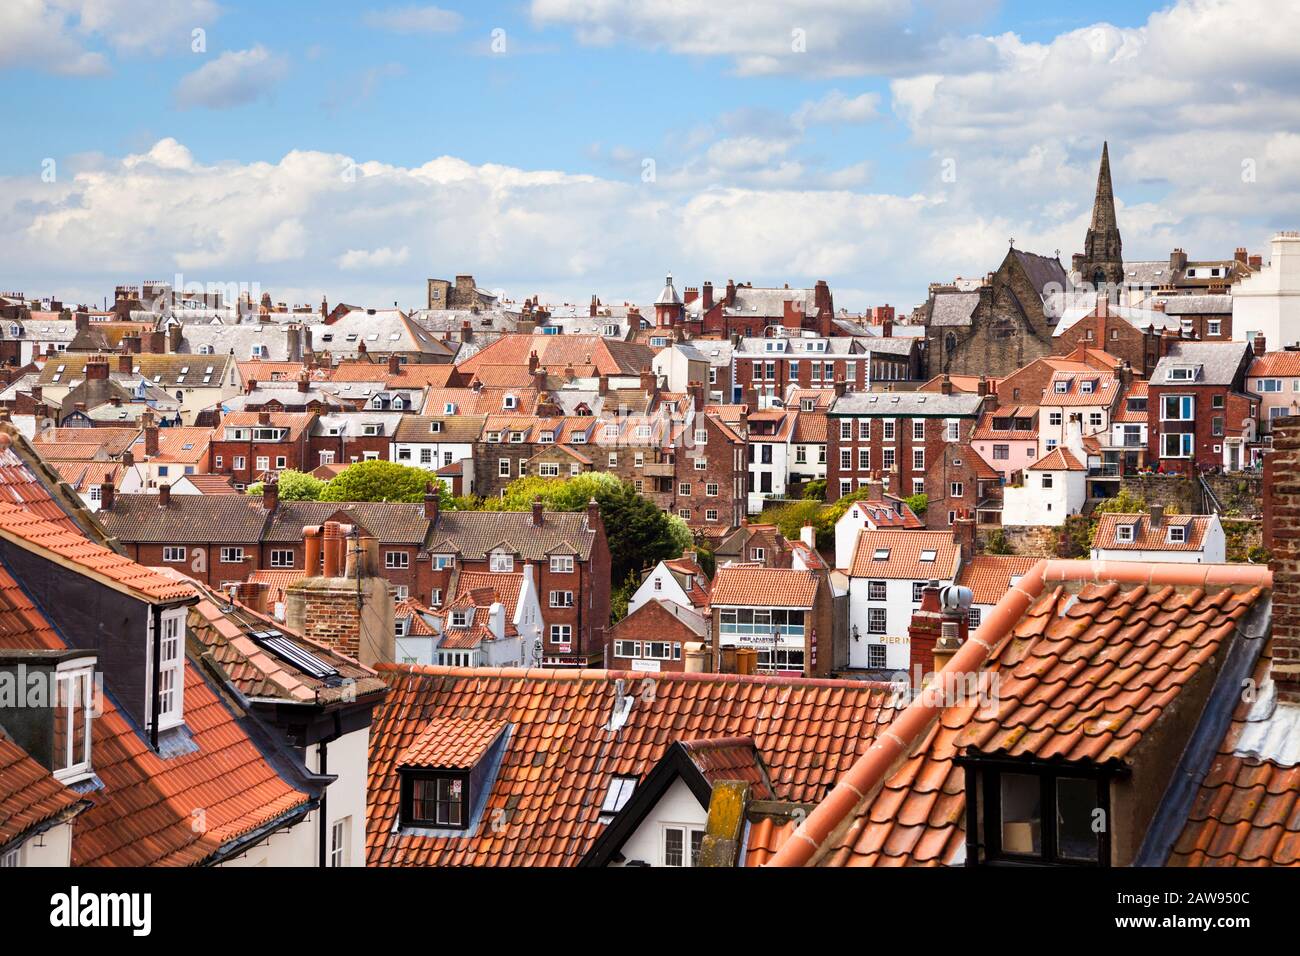 The red rooftops and skyline of Whitby, North Yorkshire, England UK Stock Photo